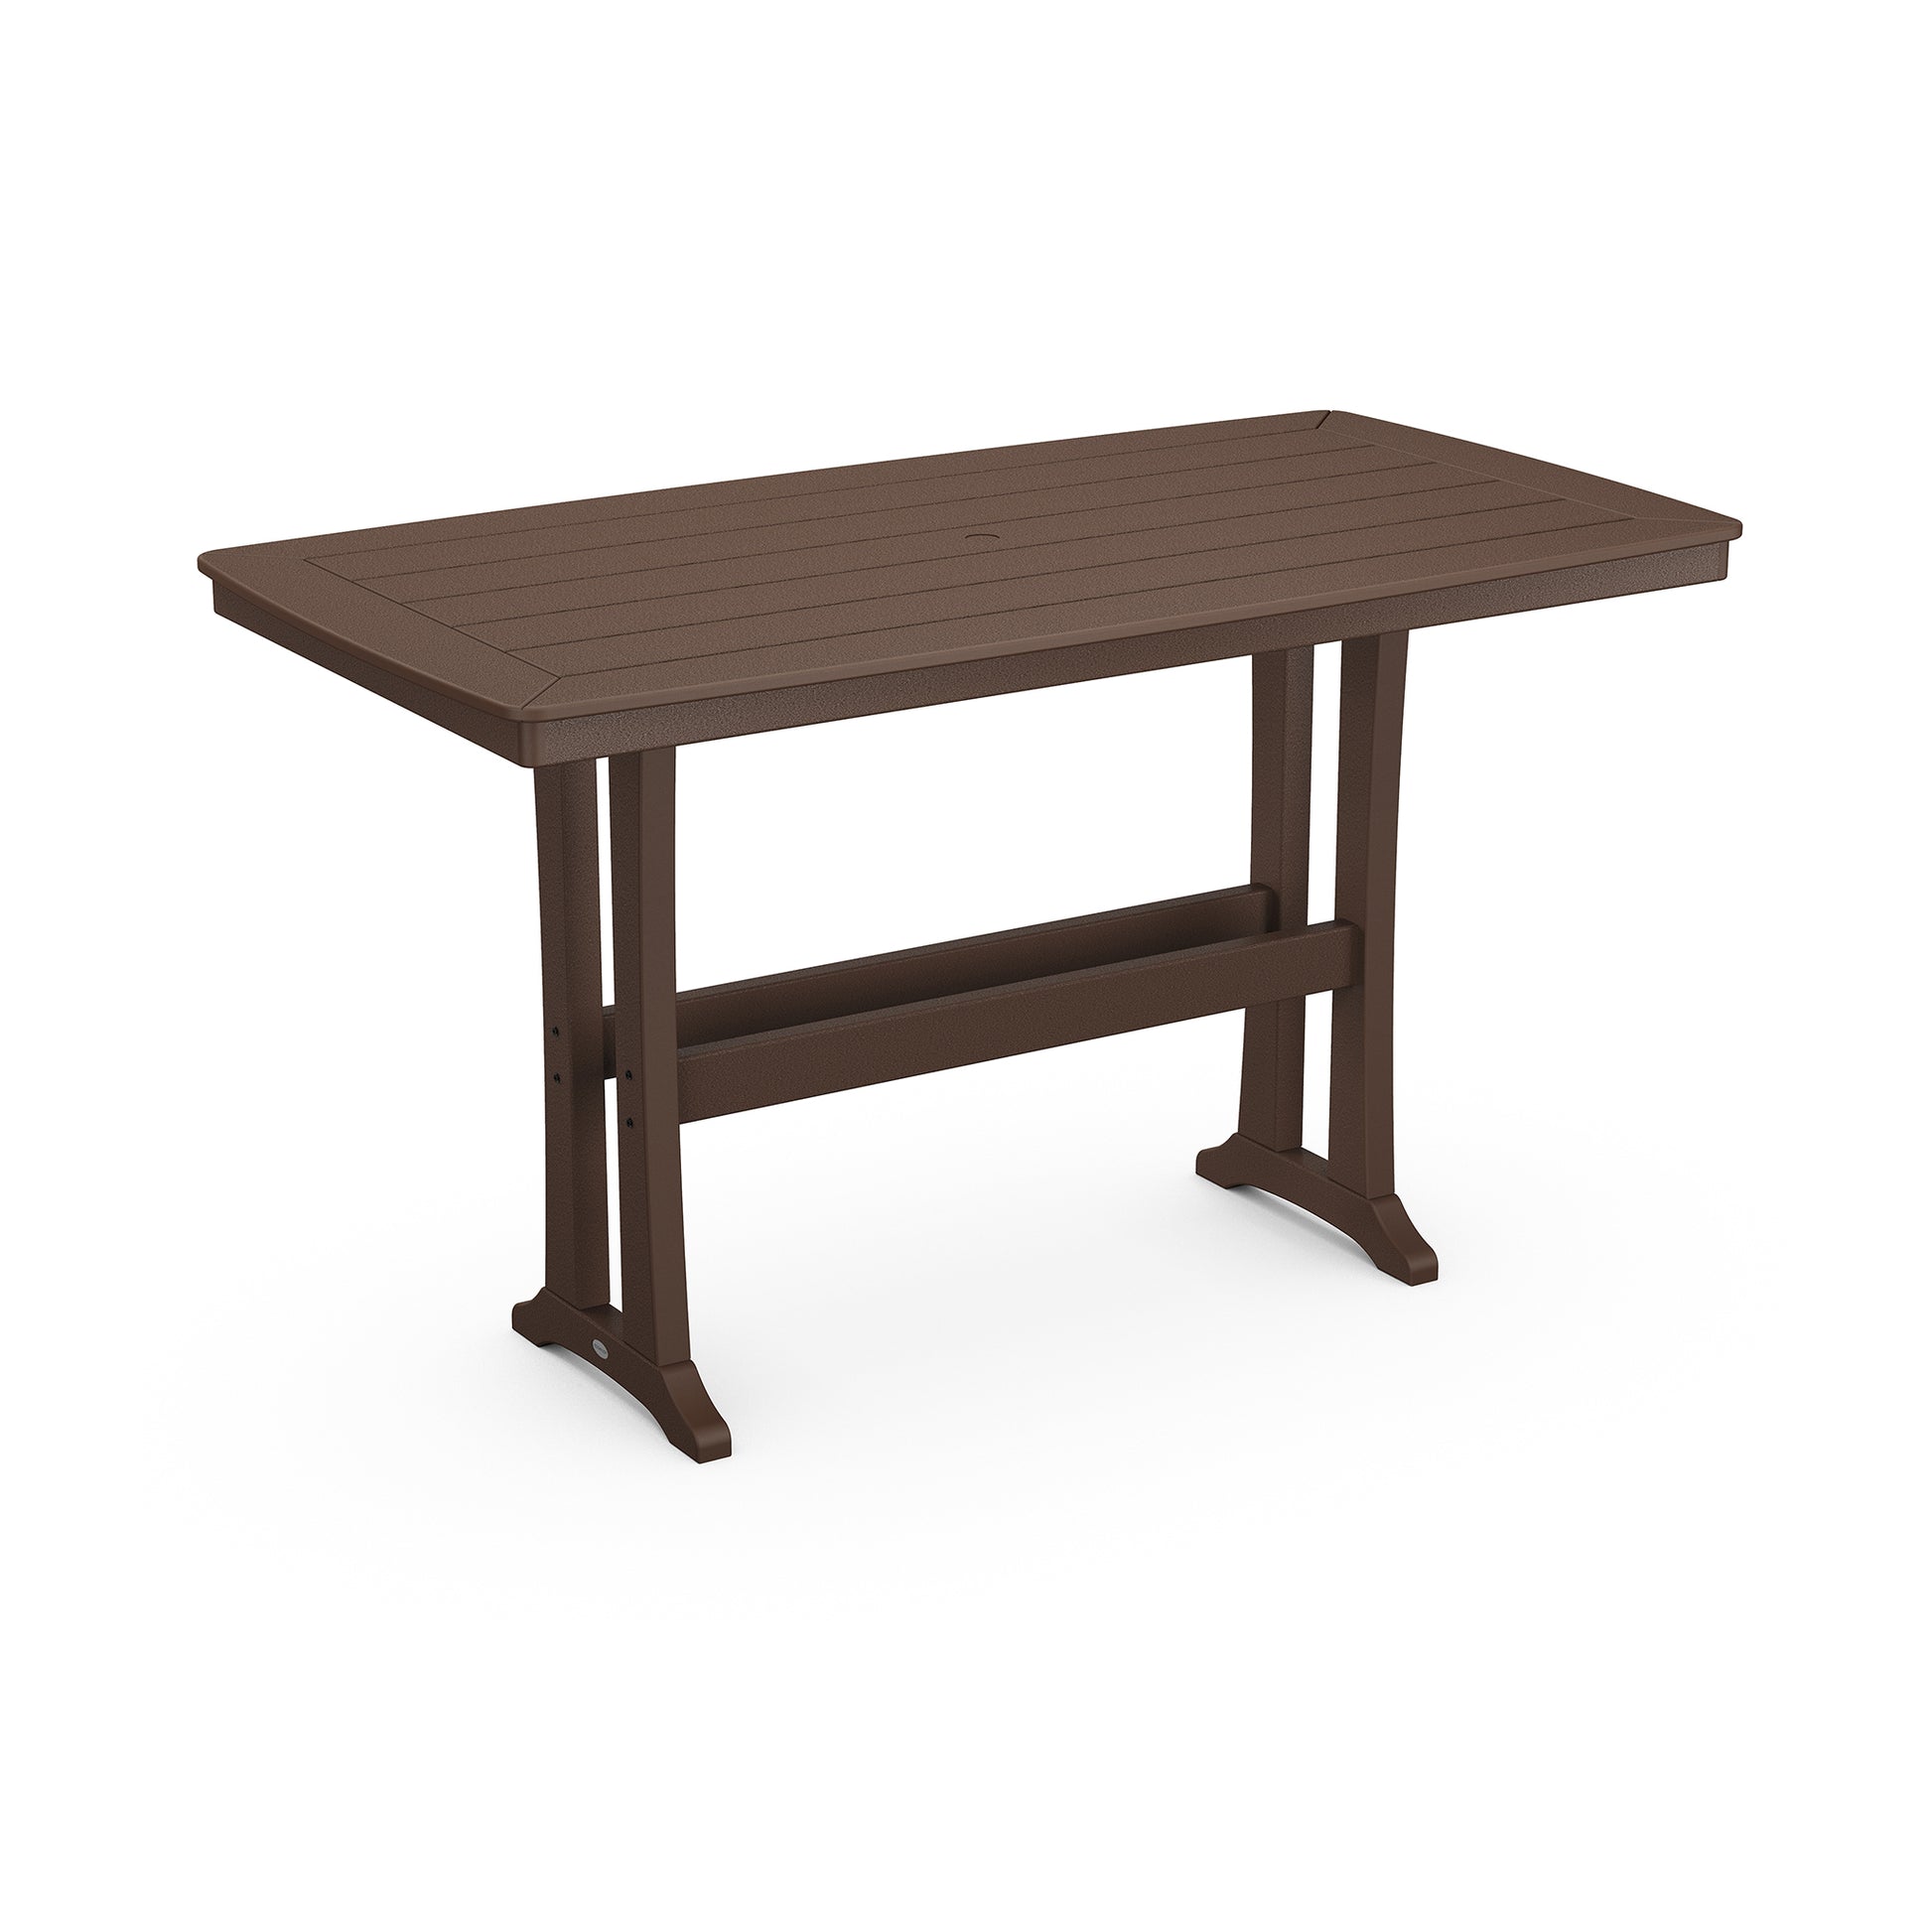 A 3D rendering of a POLYWOOD Nautical Trestle 38" x 73" Bar Table made from POLYWOOD® lumber, with a plank-style top and X-shaped legs on each end, set against a white background